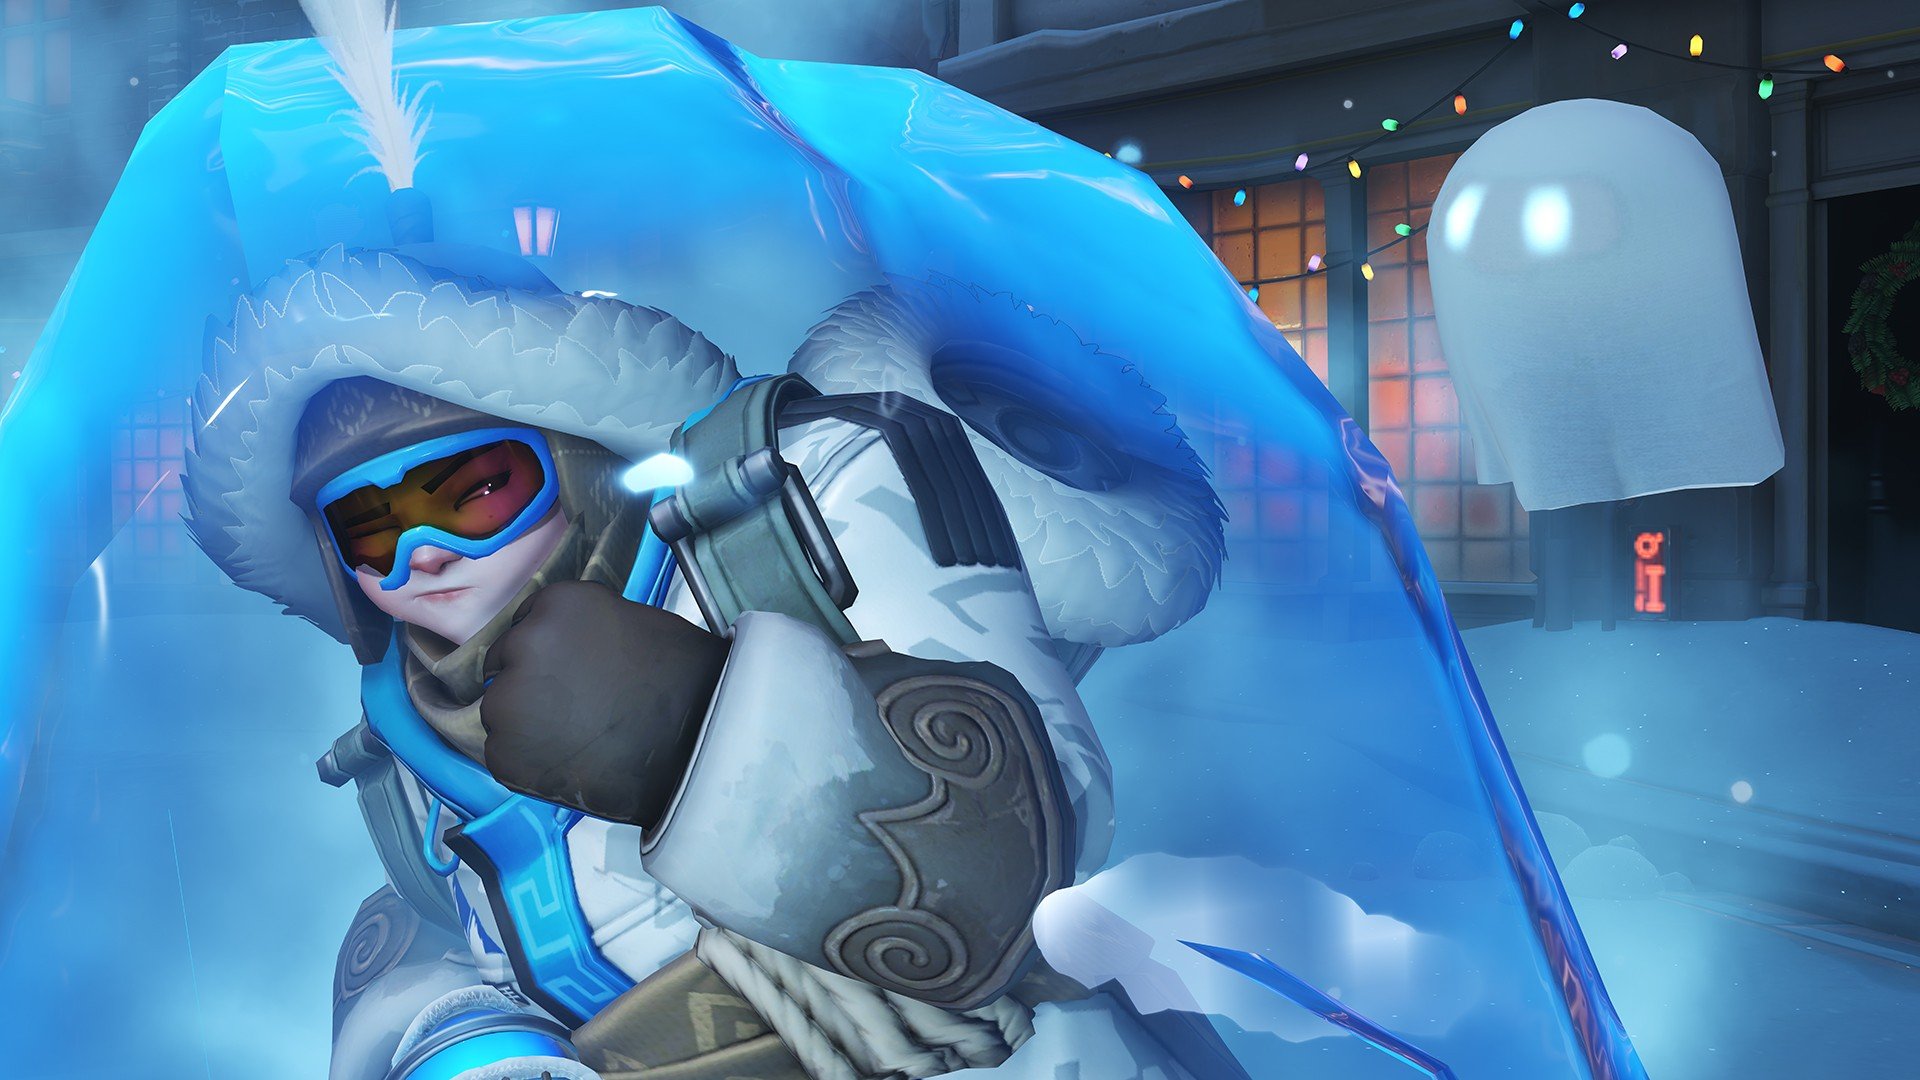 Overwatch Snow Mei Overwatch Hd Wallpapers Desktop And Images, Photos, Reviews